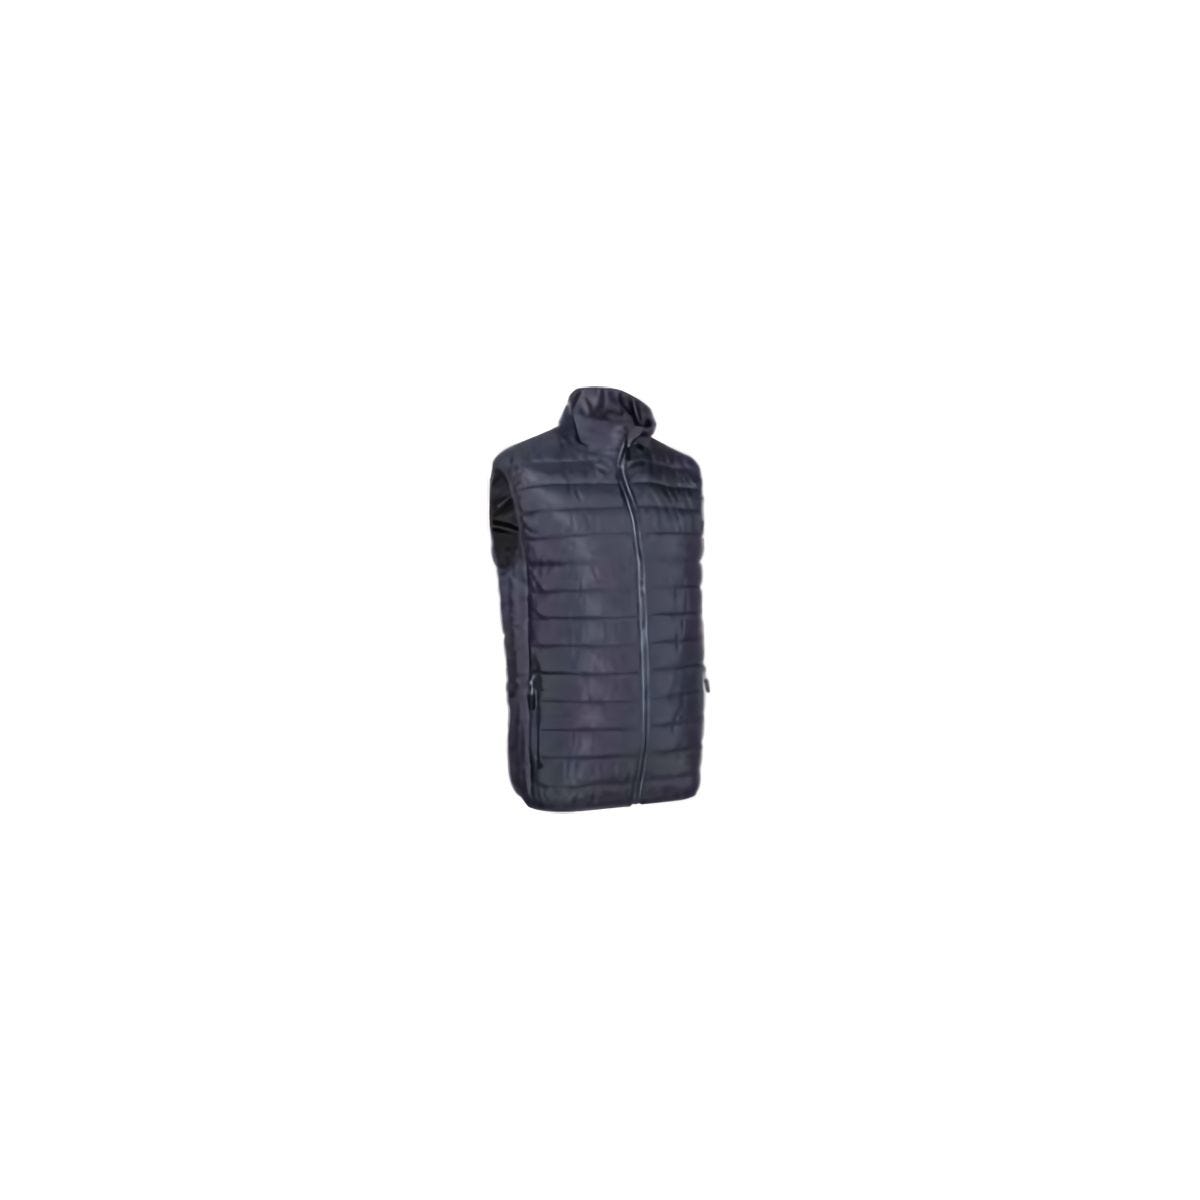 Gilet Kaba gris - Coverguard - Taille L 0